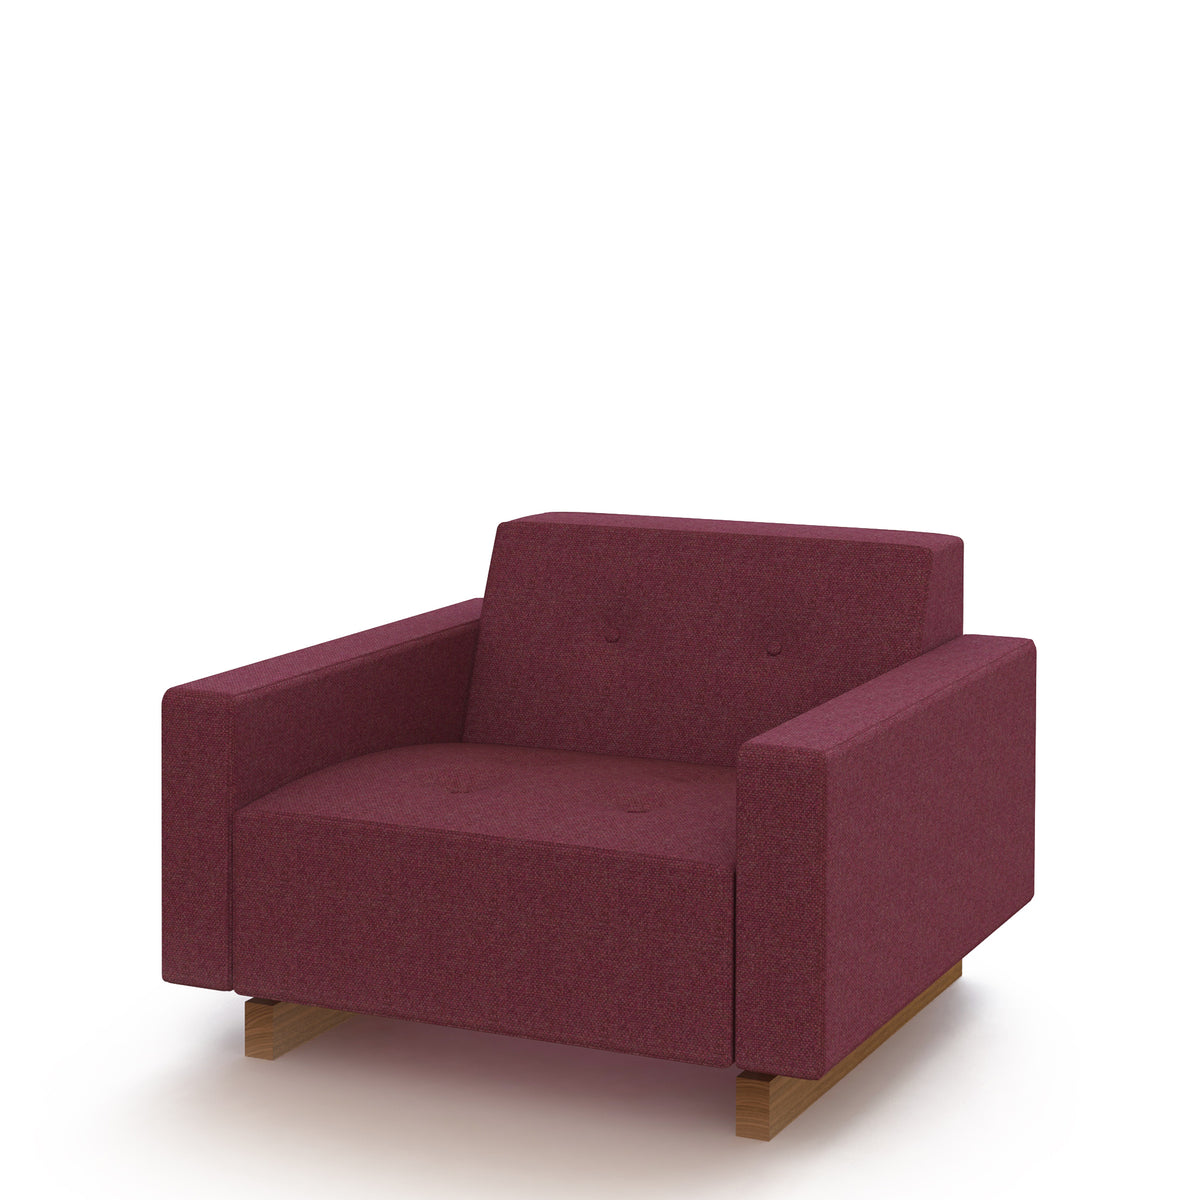 Hitch Mylius Office HM46 Wembley Abbey Armchair